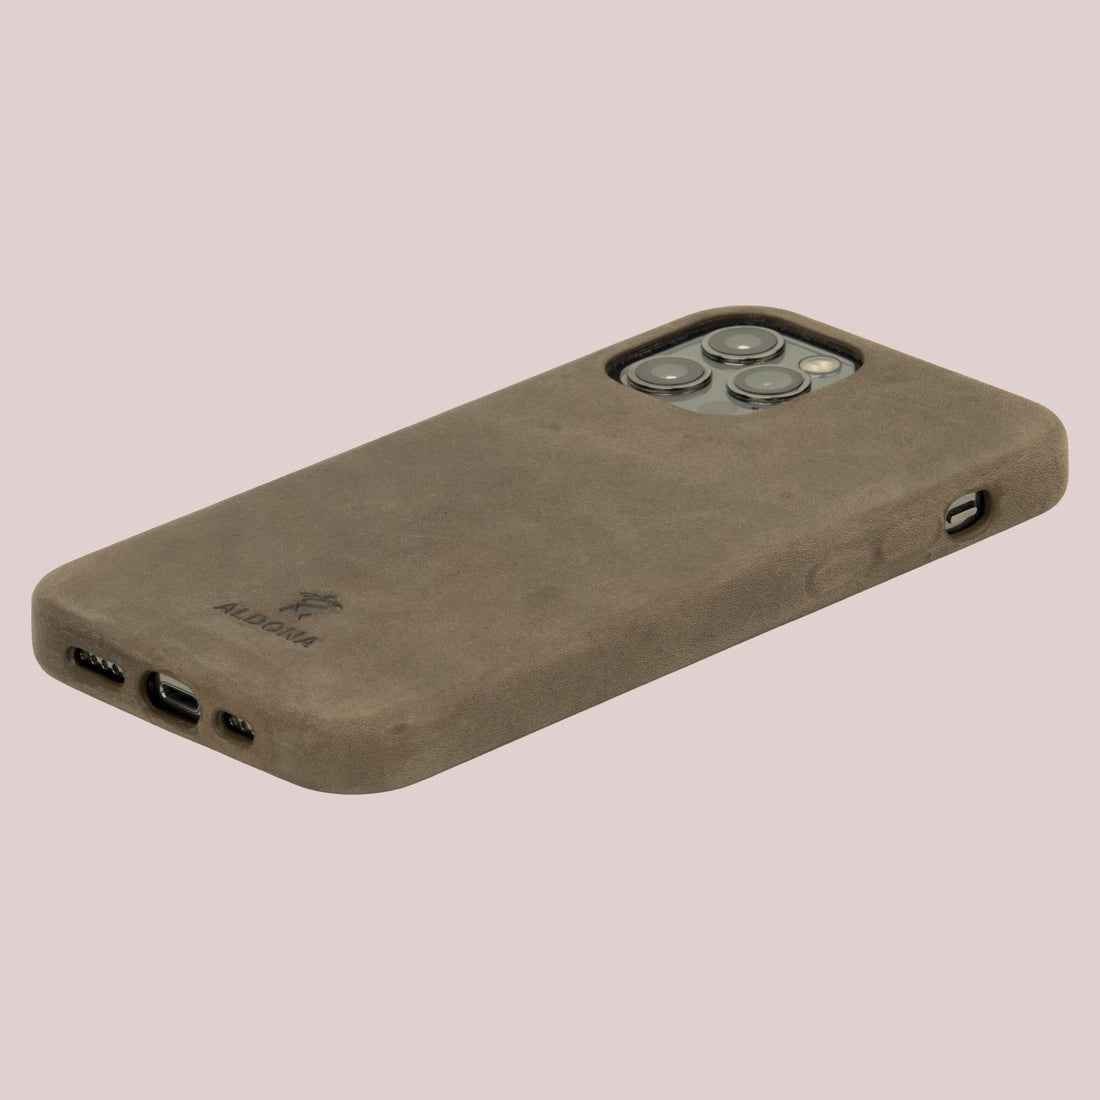 Kalon Case for iPhone 13 Pro Max with MagSafe Compatibility - Vintage Tan